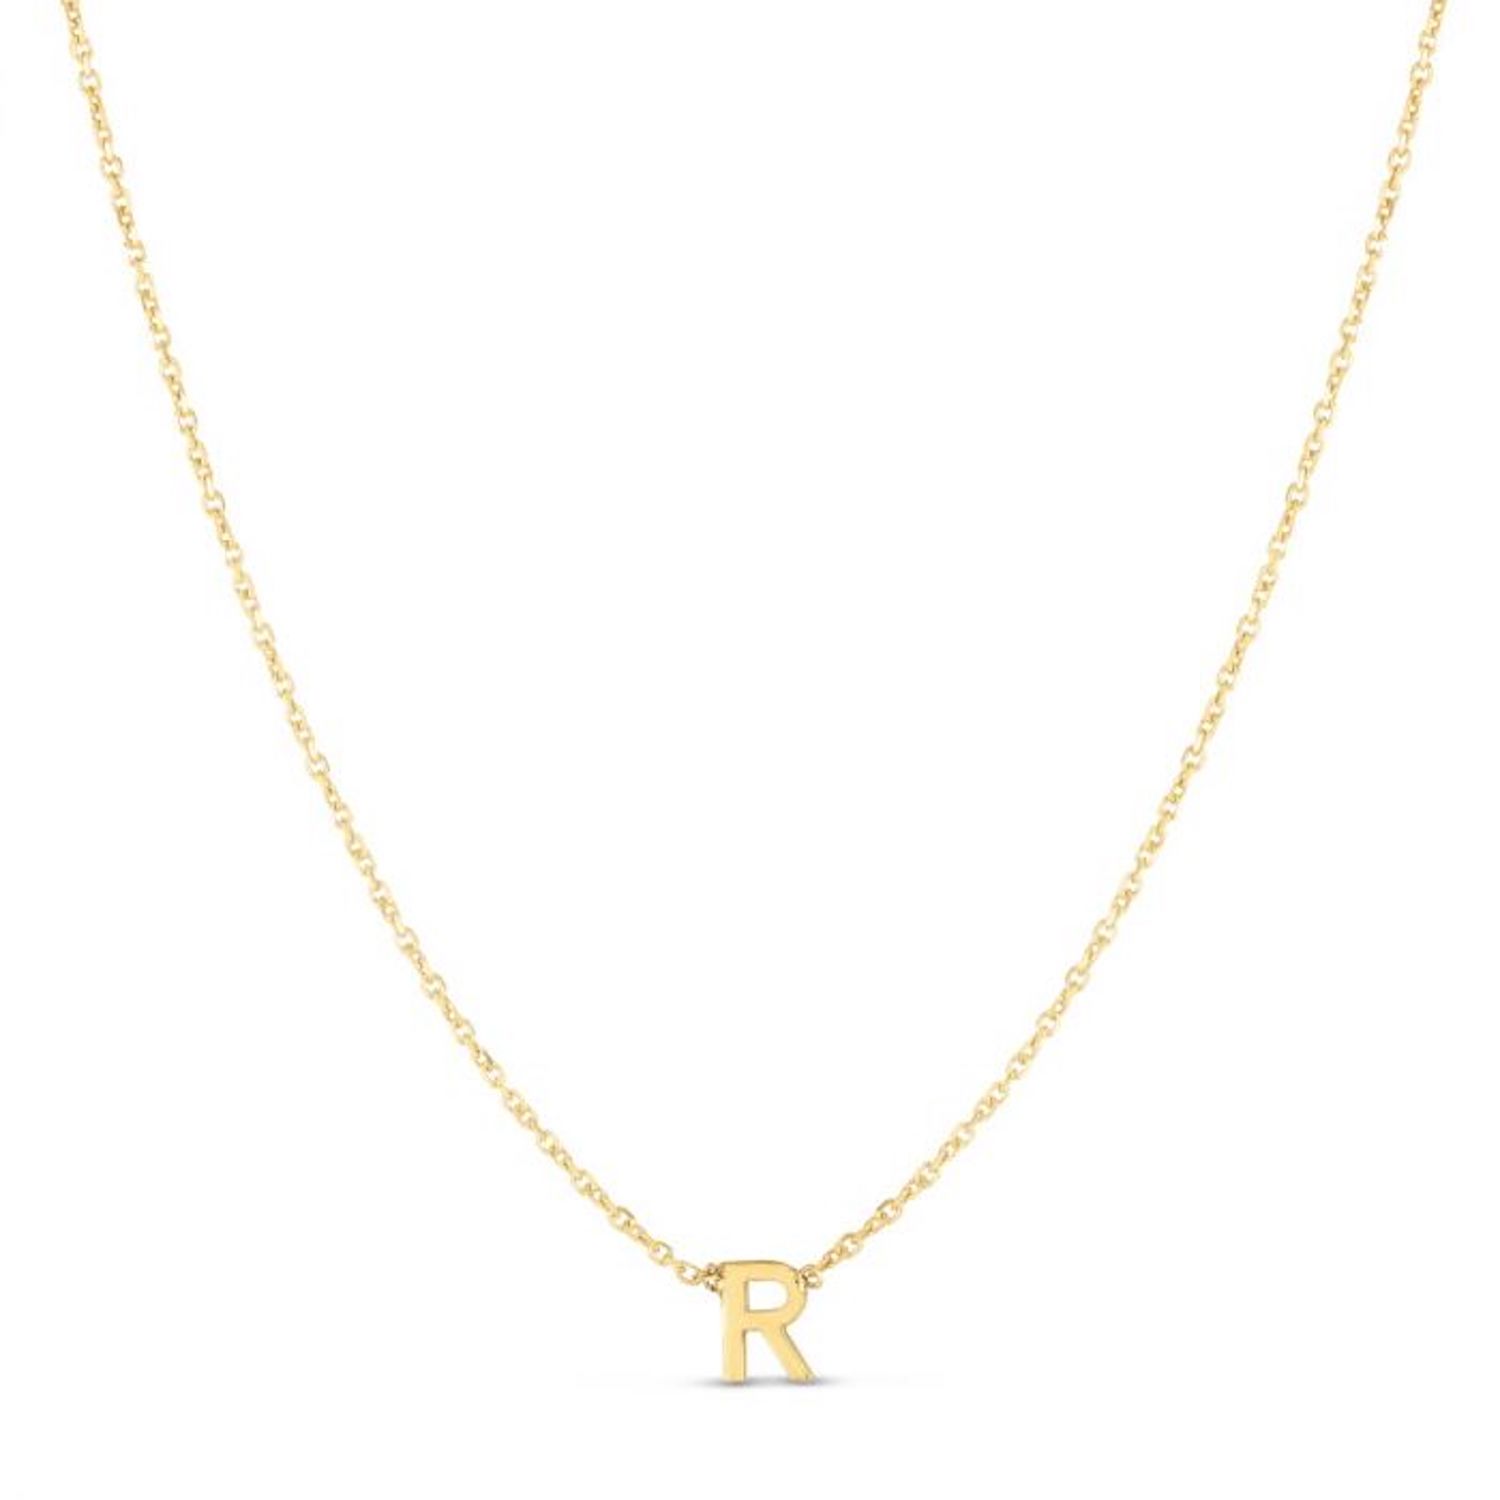 14K Yellow Gold Letter Initials Pendant Necklace 16"-18" - R